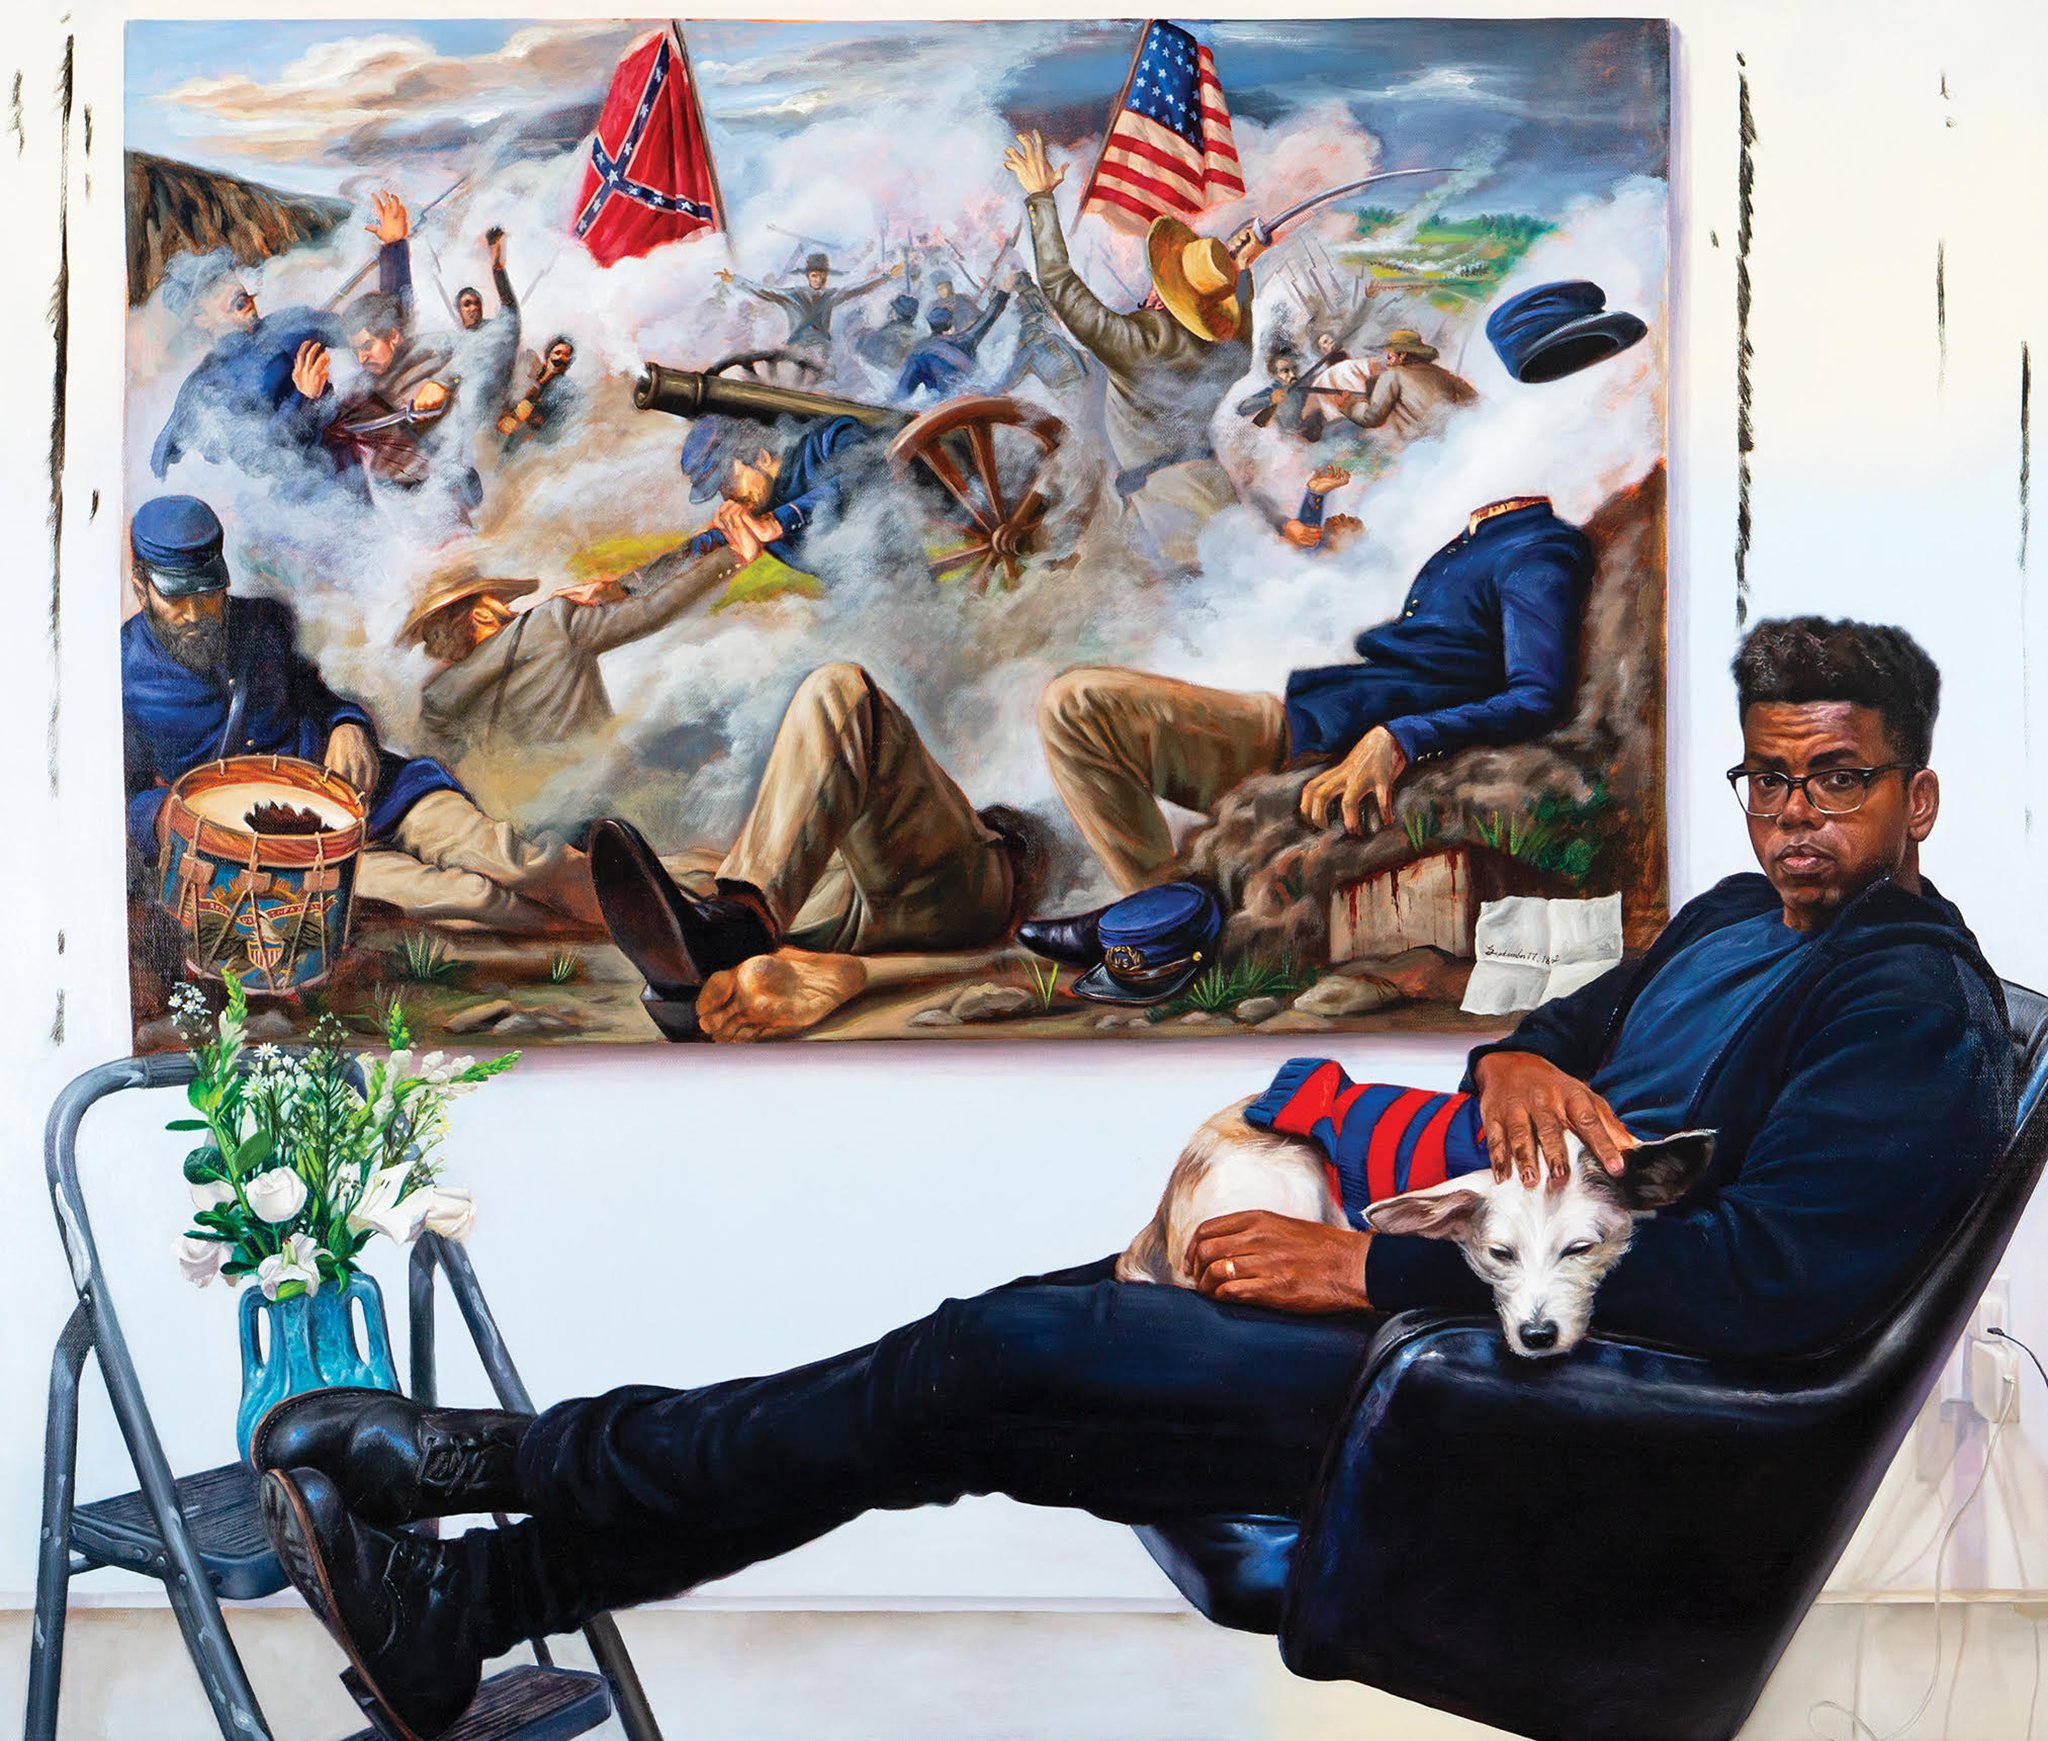  Mario Moore,  During and After the Battle , 2020. Oil on linen. Purchased with funds from the Winifred and Kevin P. Reilly Initiative for Underrepresented Artists. 